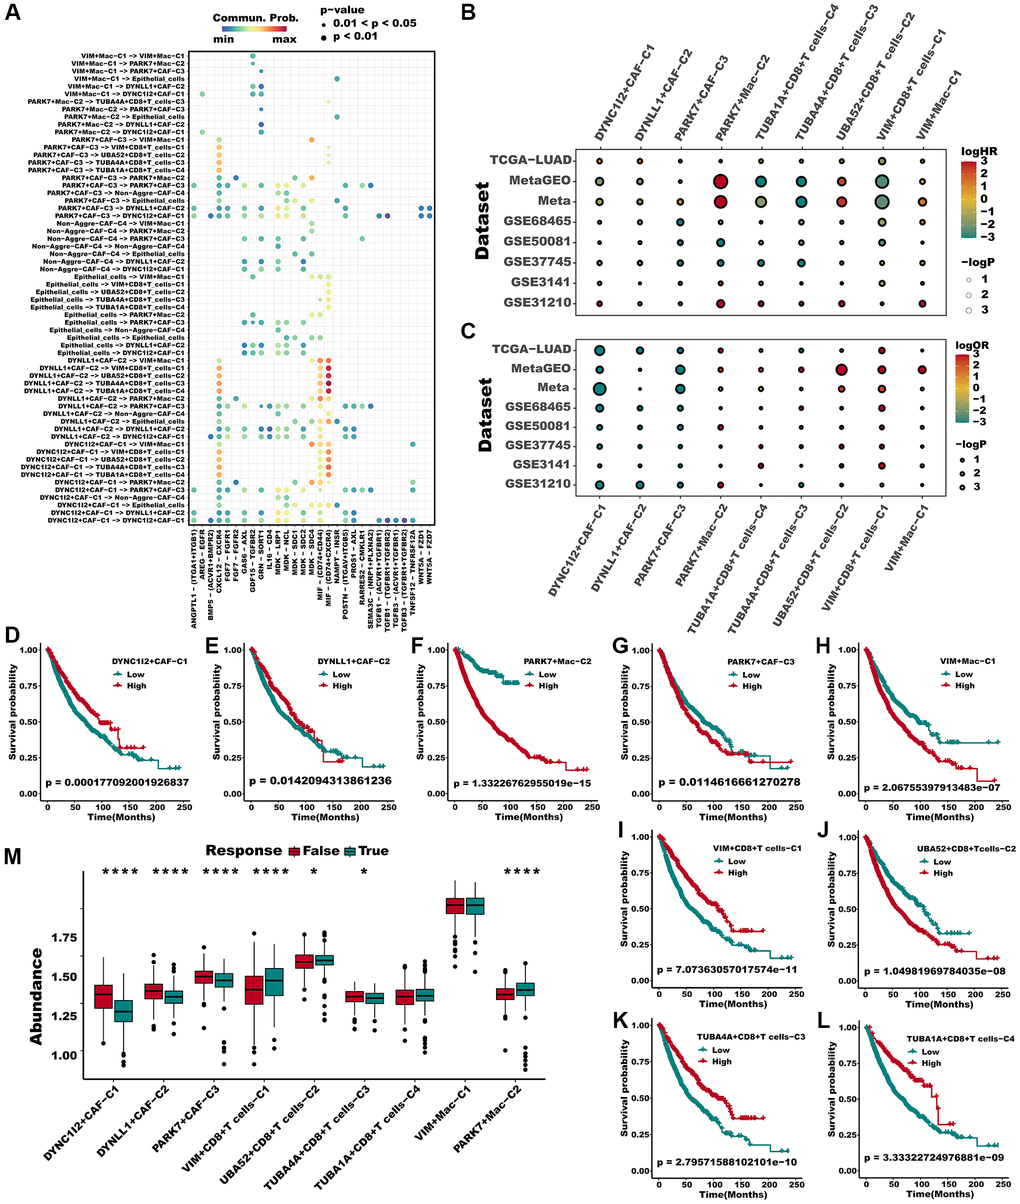 Multiple aggrephagy cell subtypes influenced the prognosis and immunotherapy response of LUAD patients. (A) The landscape of all cell-cell communication within all identified aggrephagy subtypes. (B) A hazard ration of different aggrephagy subtypes in 8 LUAD cohorts. (C) Odd ratio produced by logistic regression of different subtypes in 8 cohorts. (D–L) All aggrephagy cell subtypes could distinguish the survival of patients in Meta cohort. (M) Various aggrephagy-related subtypes demonstrated significantly different infiltration in responders and non-responders of ICB in TCGA cohorts, as predicted by TIDE. Mann Whitney-Wilcoxon test was applied between responders and non-responders. *p **p ***p 